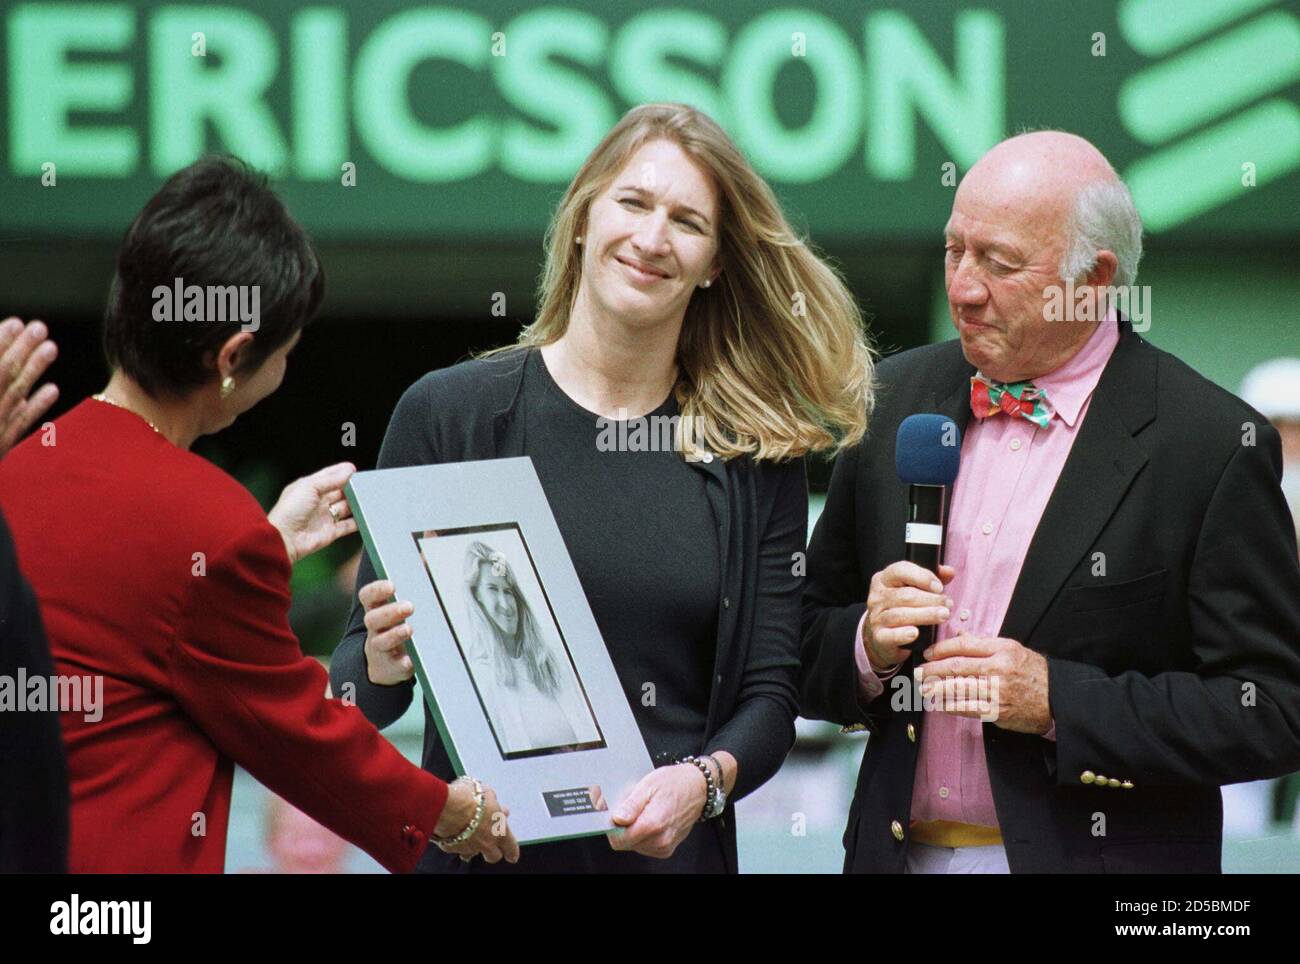 Women's tennis great Steffi Graf (C) is inducted into the Tennis Hall of  Fame by announcer Bud Collins (R) in Key Biscayne during the Ericsson Open  March 25 Stock Photo - Alamy